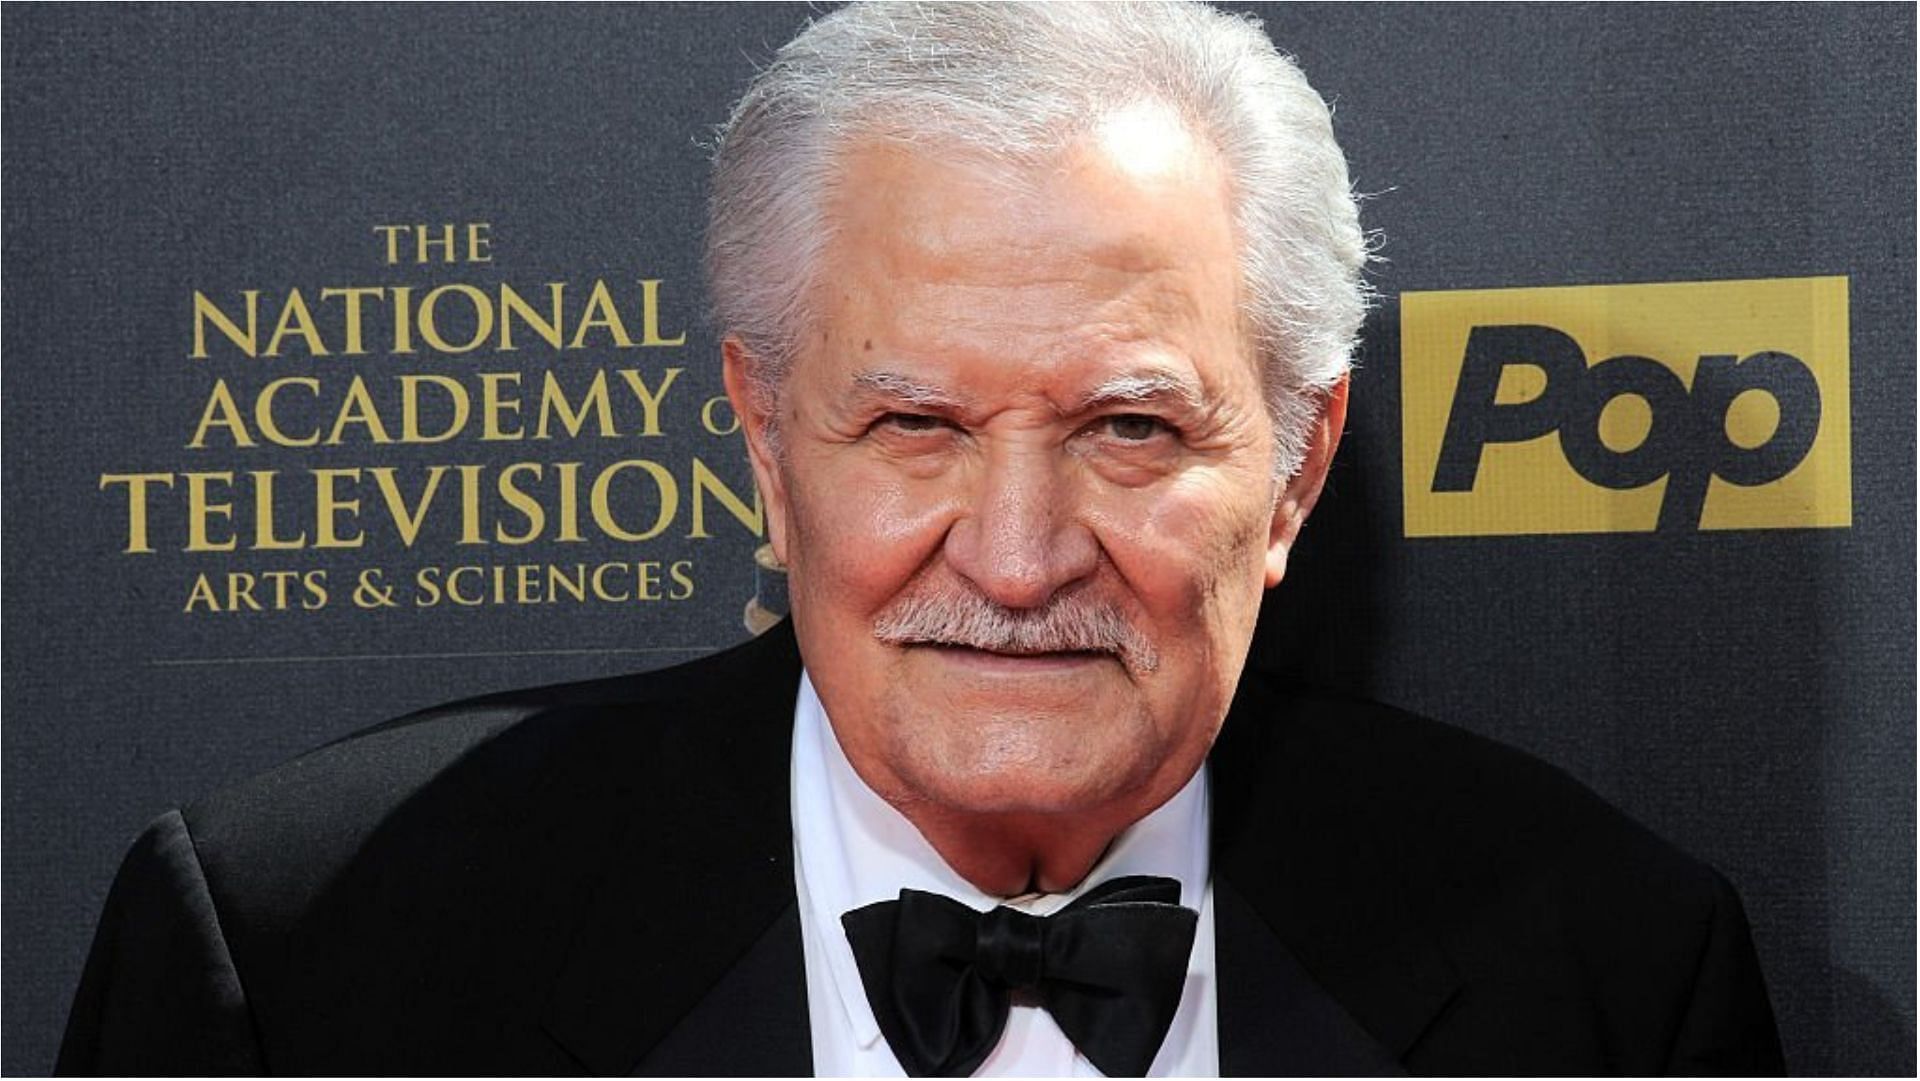 John Aniston recently died at the age of 89 Image via Albert L. Ortega/Getty Images)